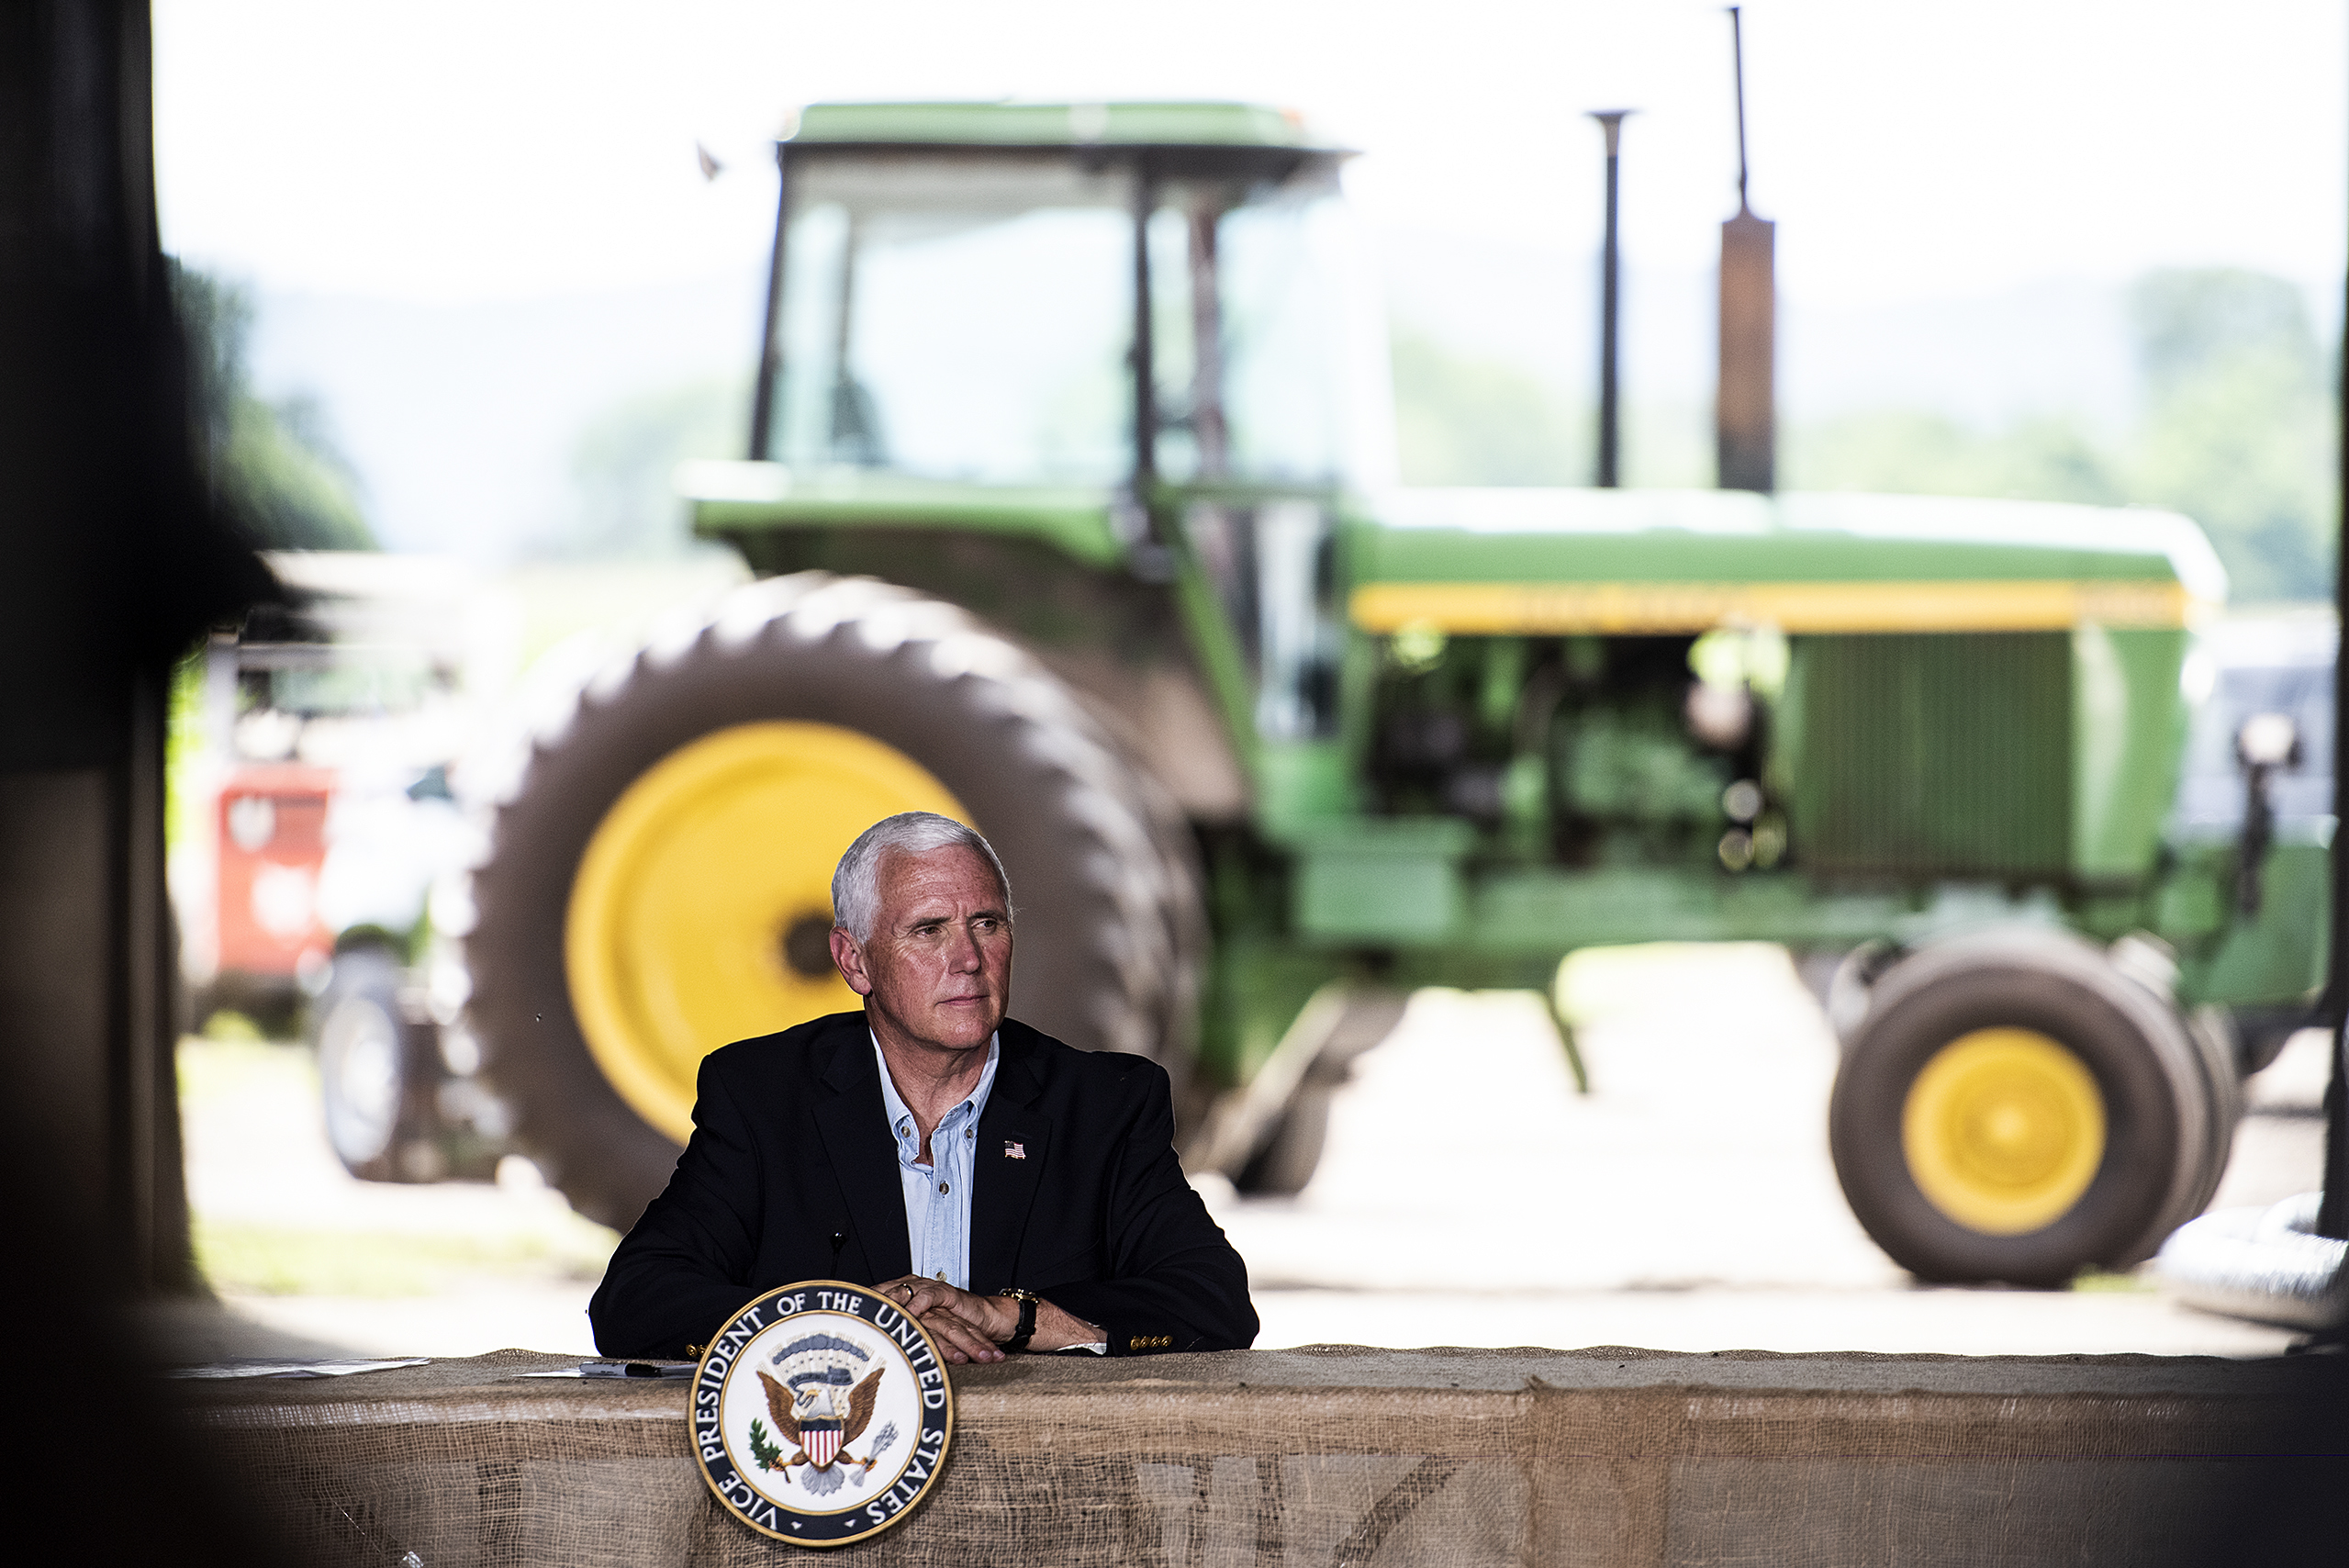 Vice President Mike Pence sits at a roundtable with a tractor in the background